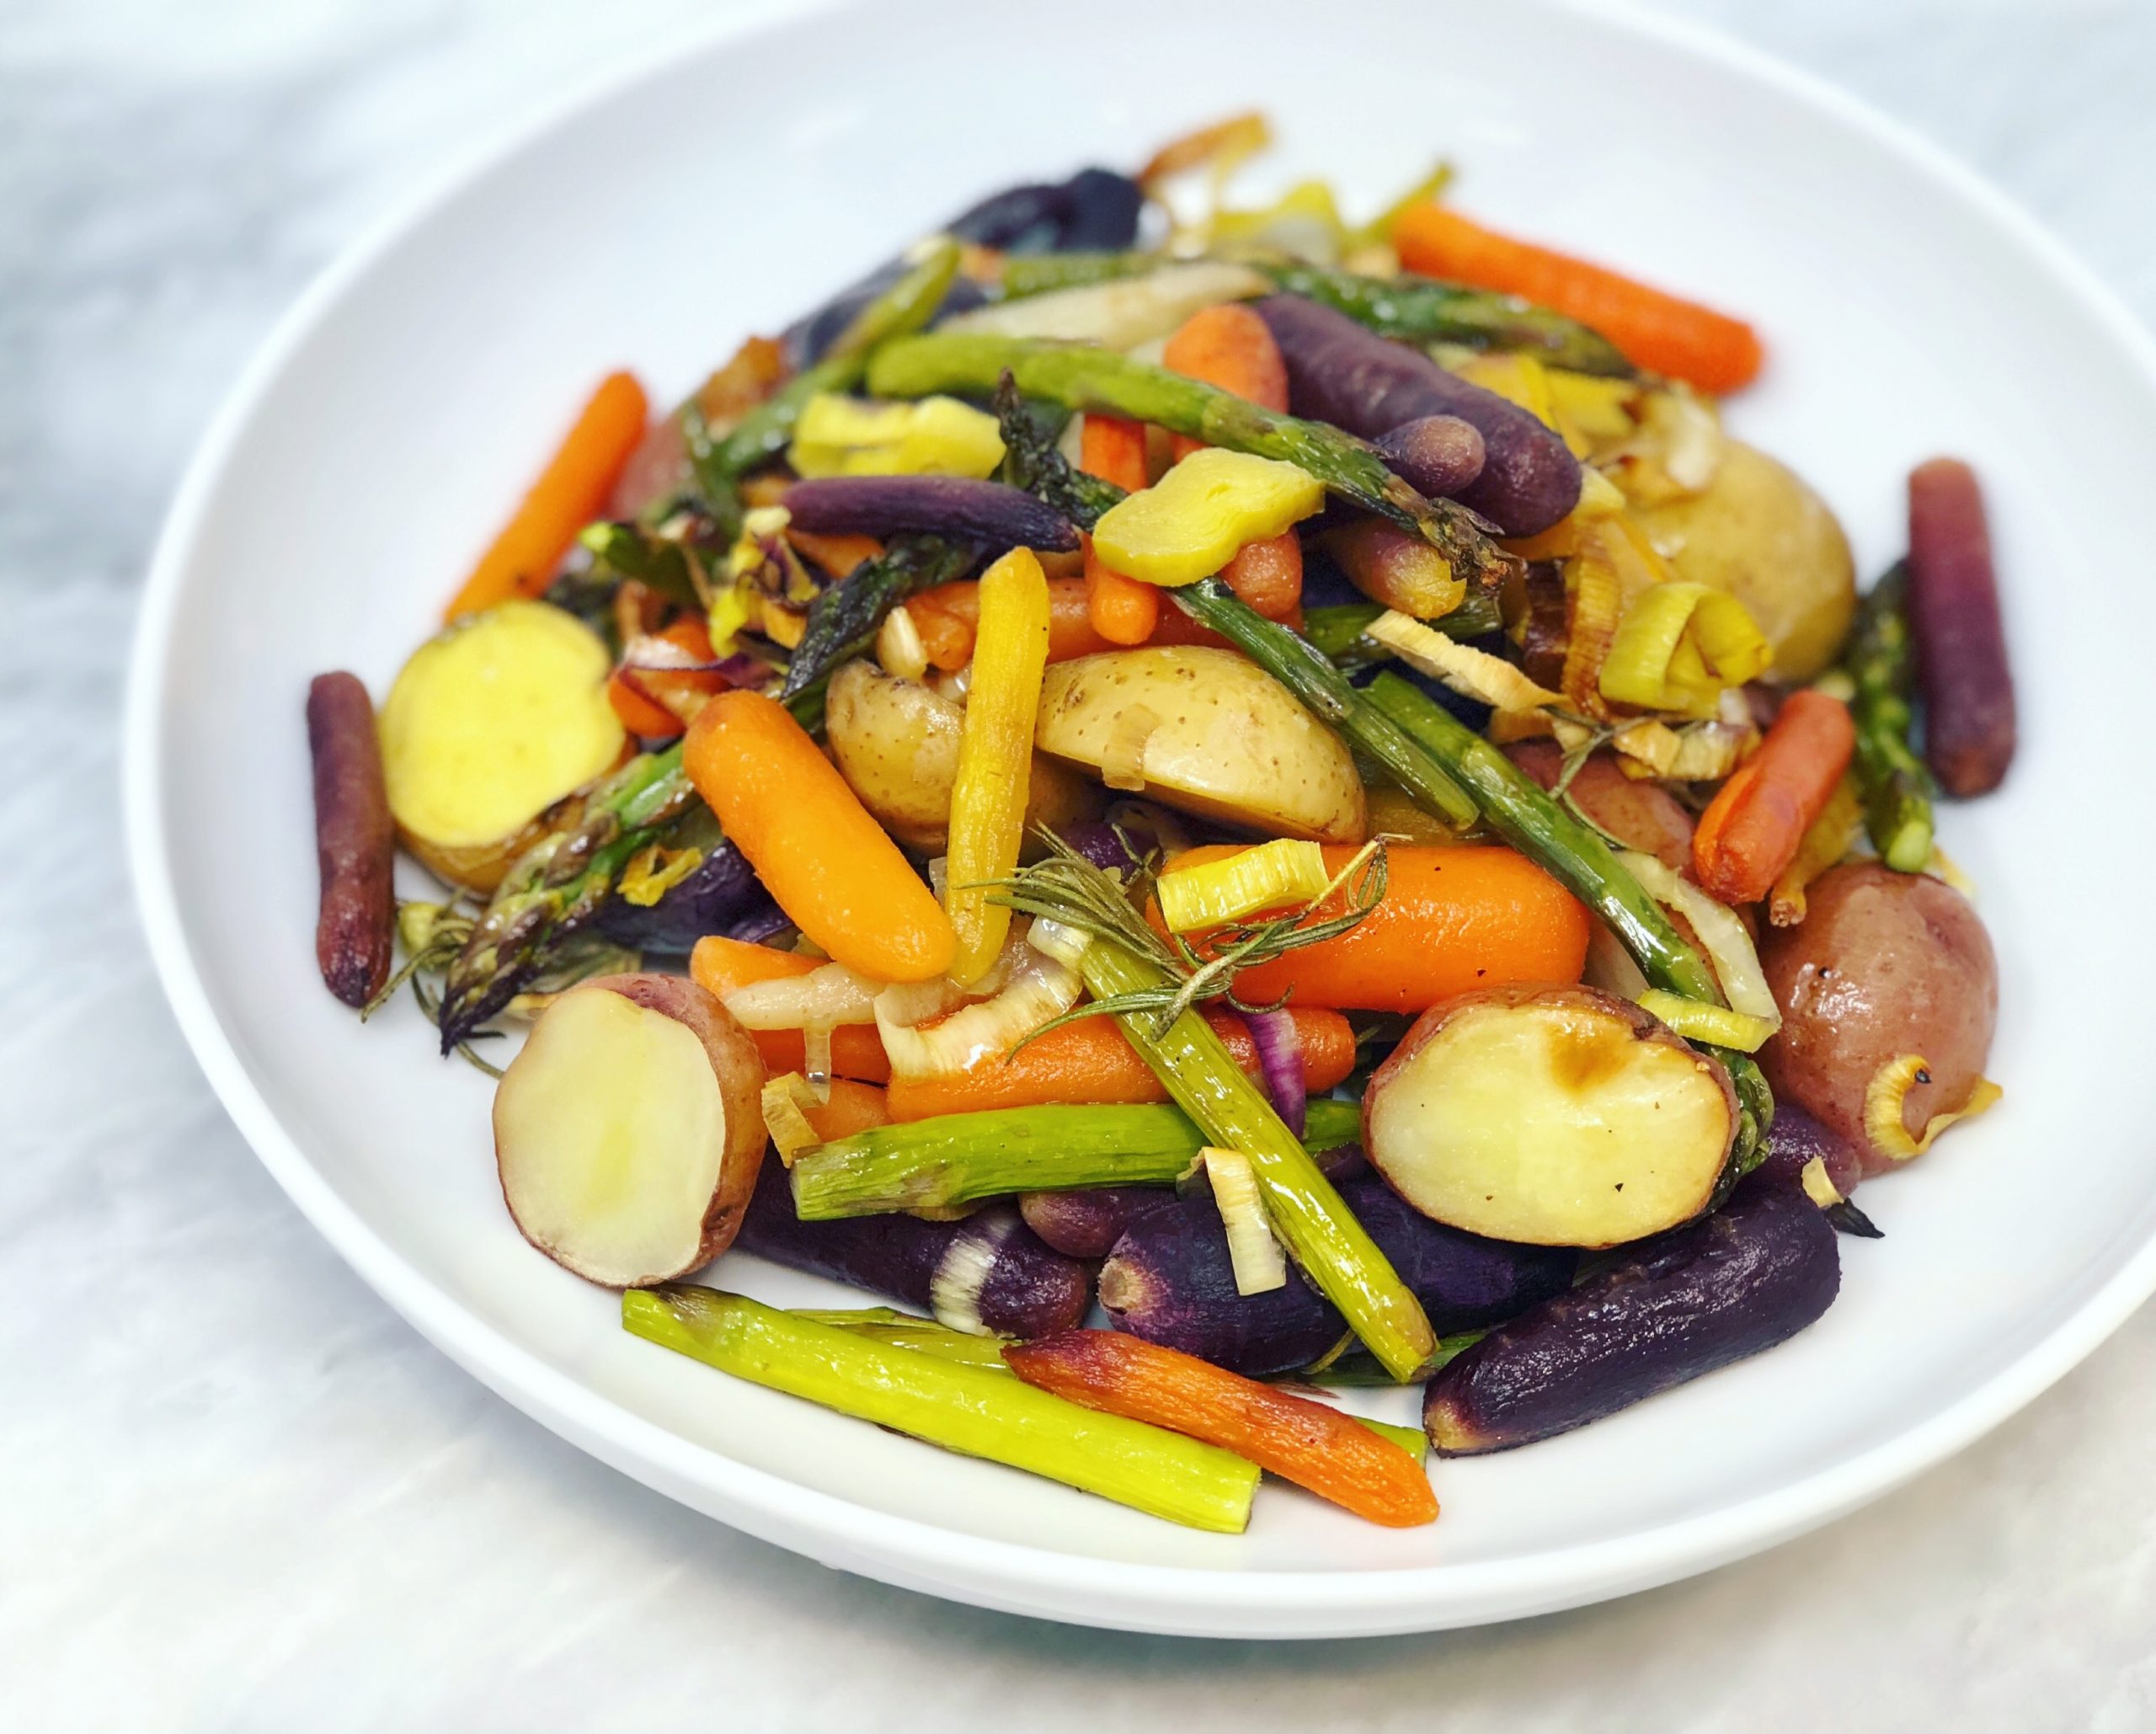 Dish of Roasted Vegetables with Rosemary and Lemon